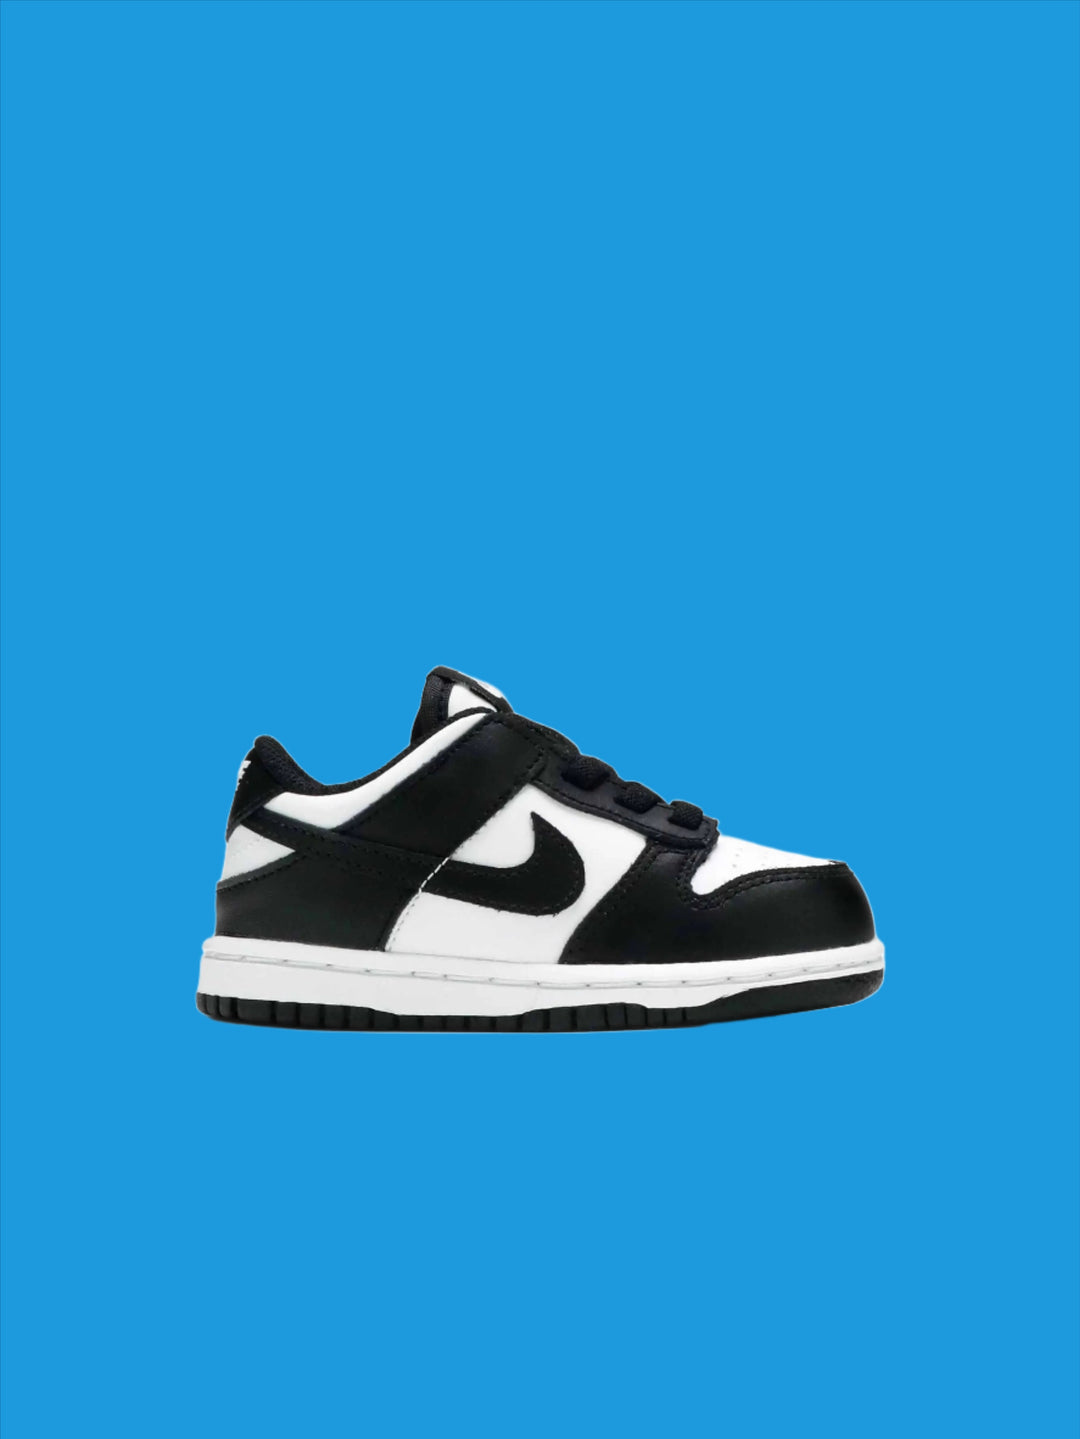 Nike Dunk Low Retro White Black Panda (TD) in Auckland, New Zealand - Shop name